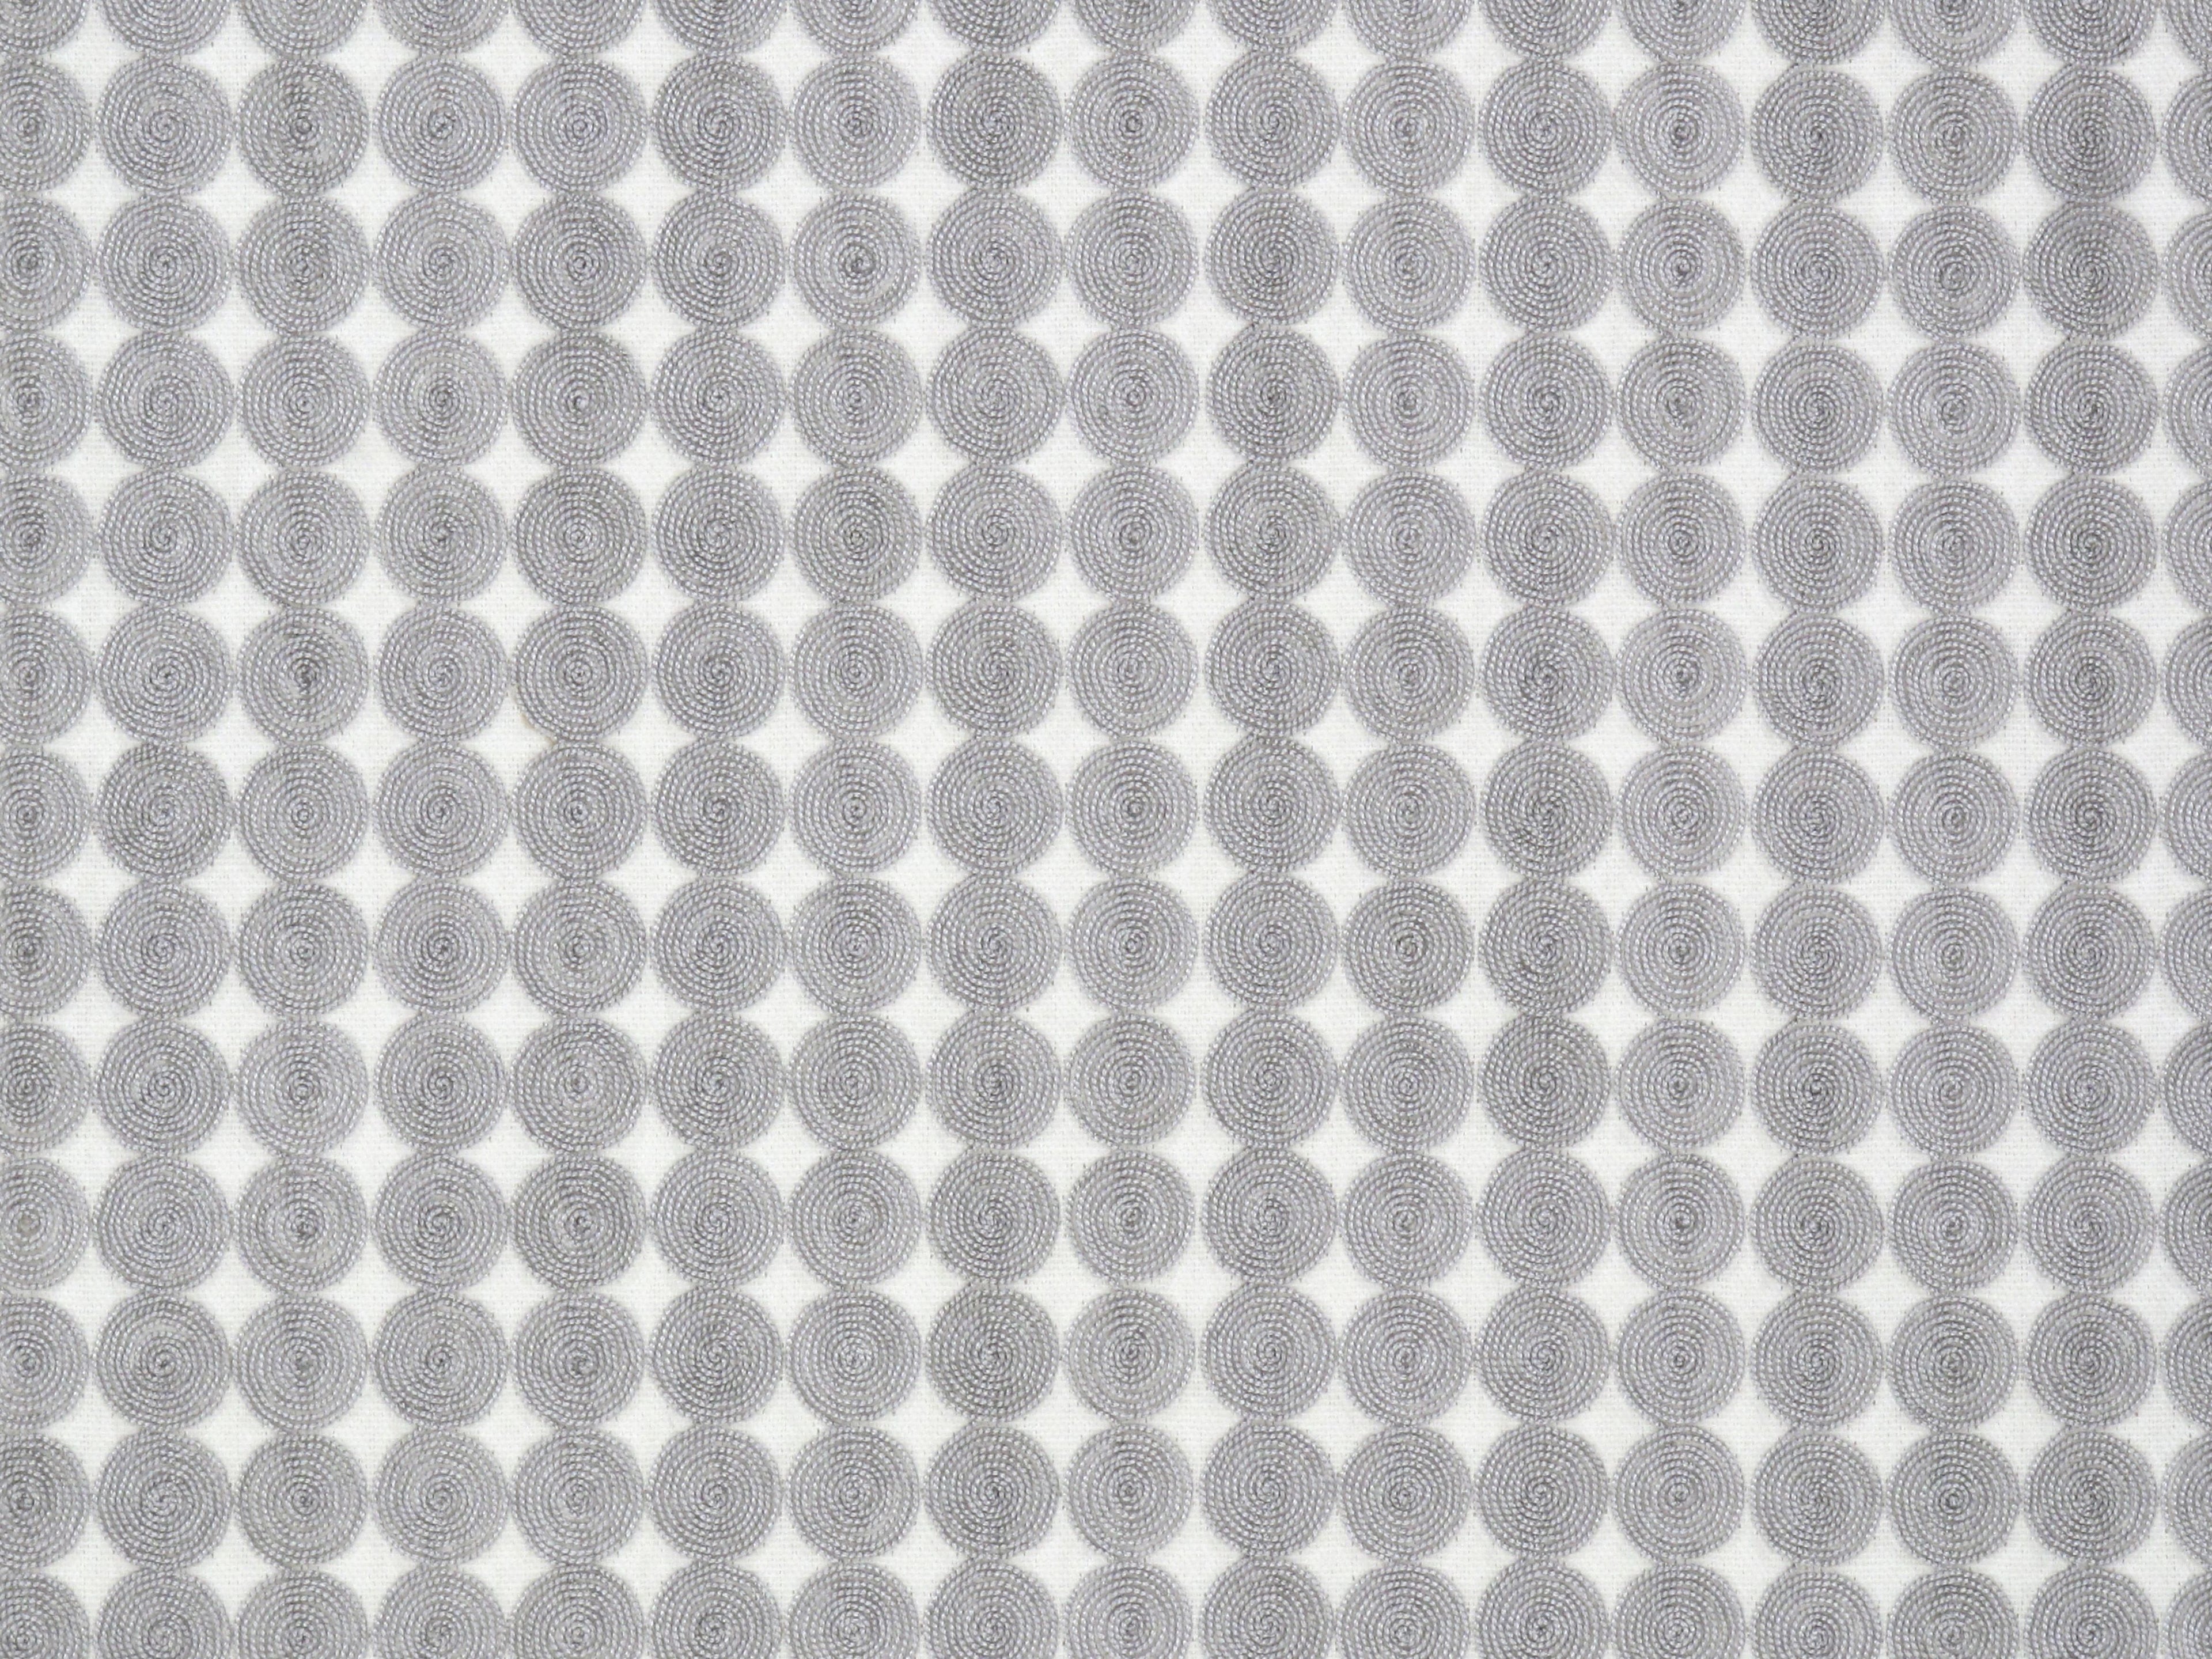 Labriz fabric in mist color - pattern number SI 00111720 - by Scalamandre in the Old World Weavers collection